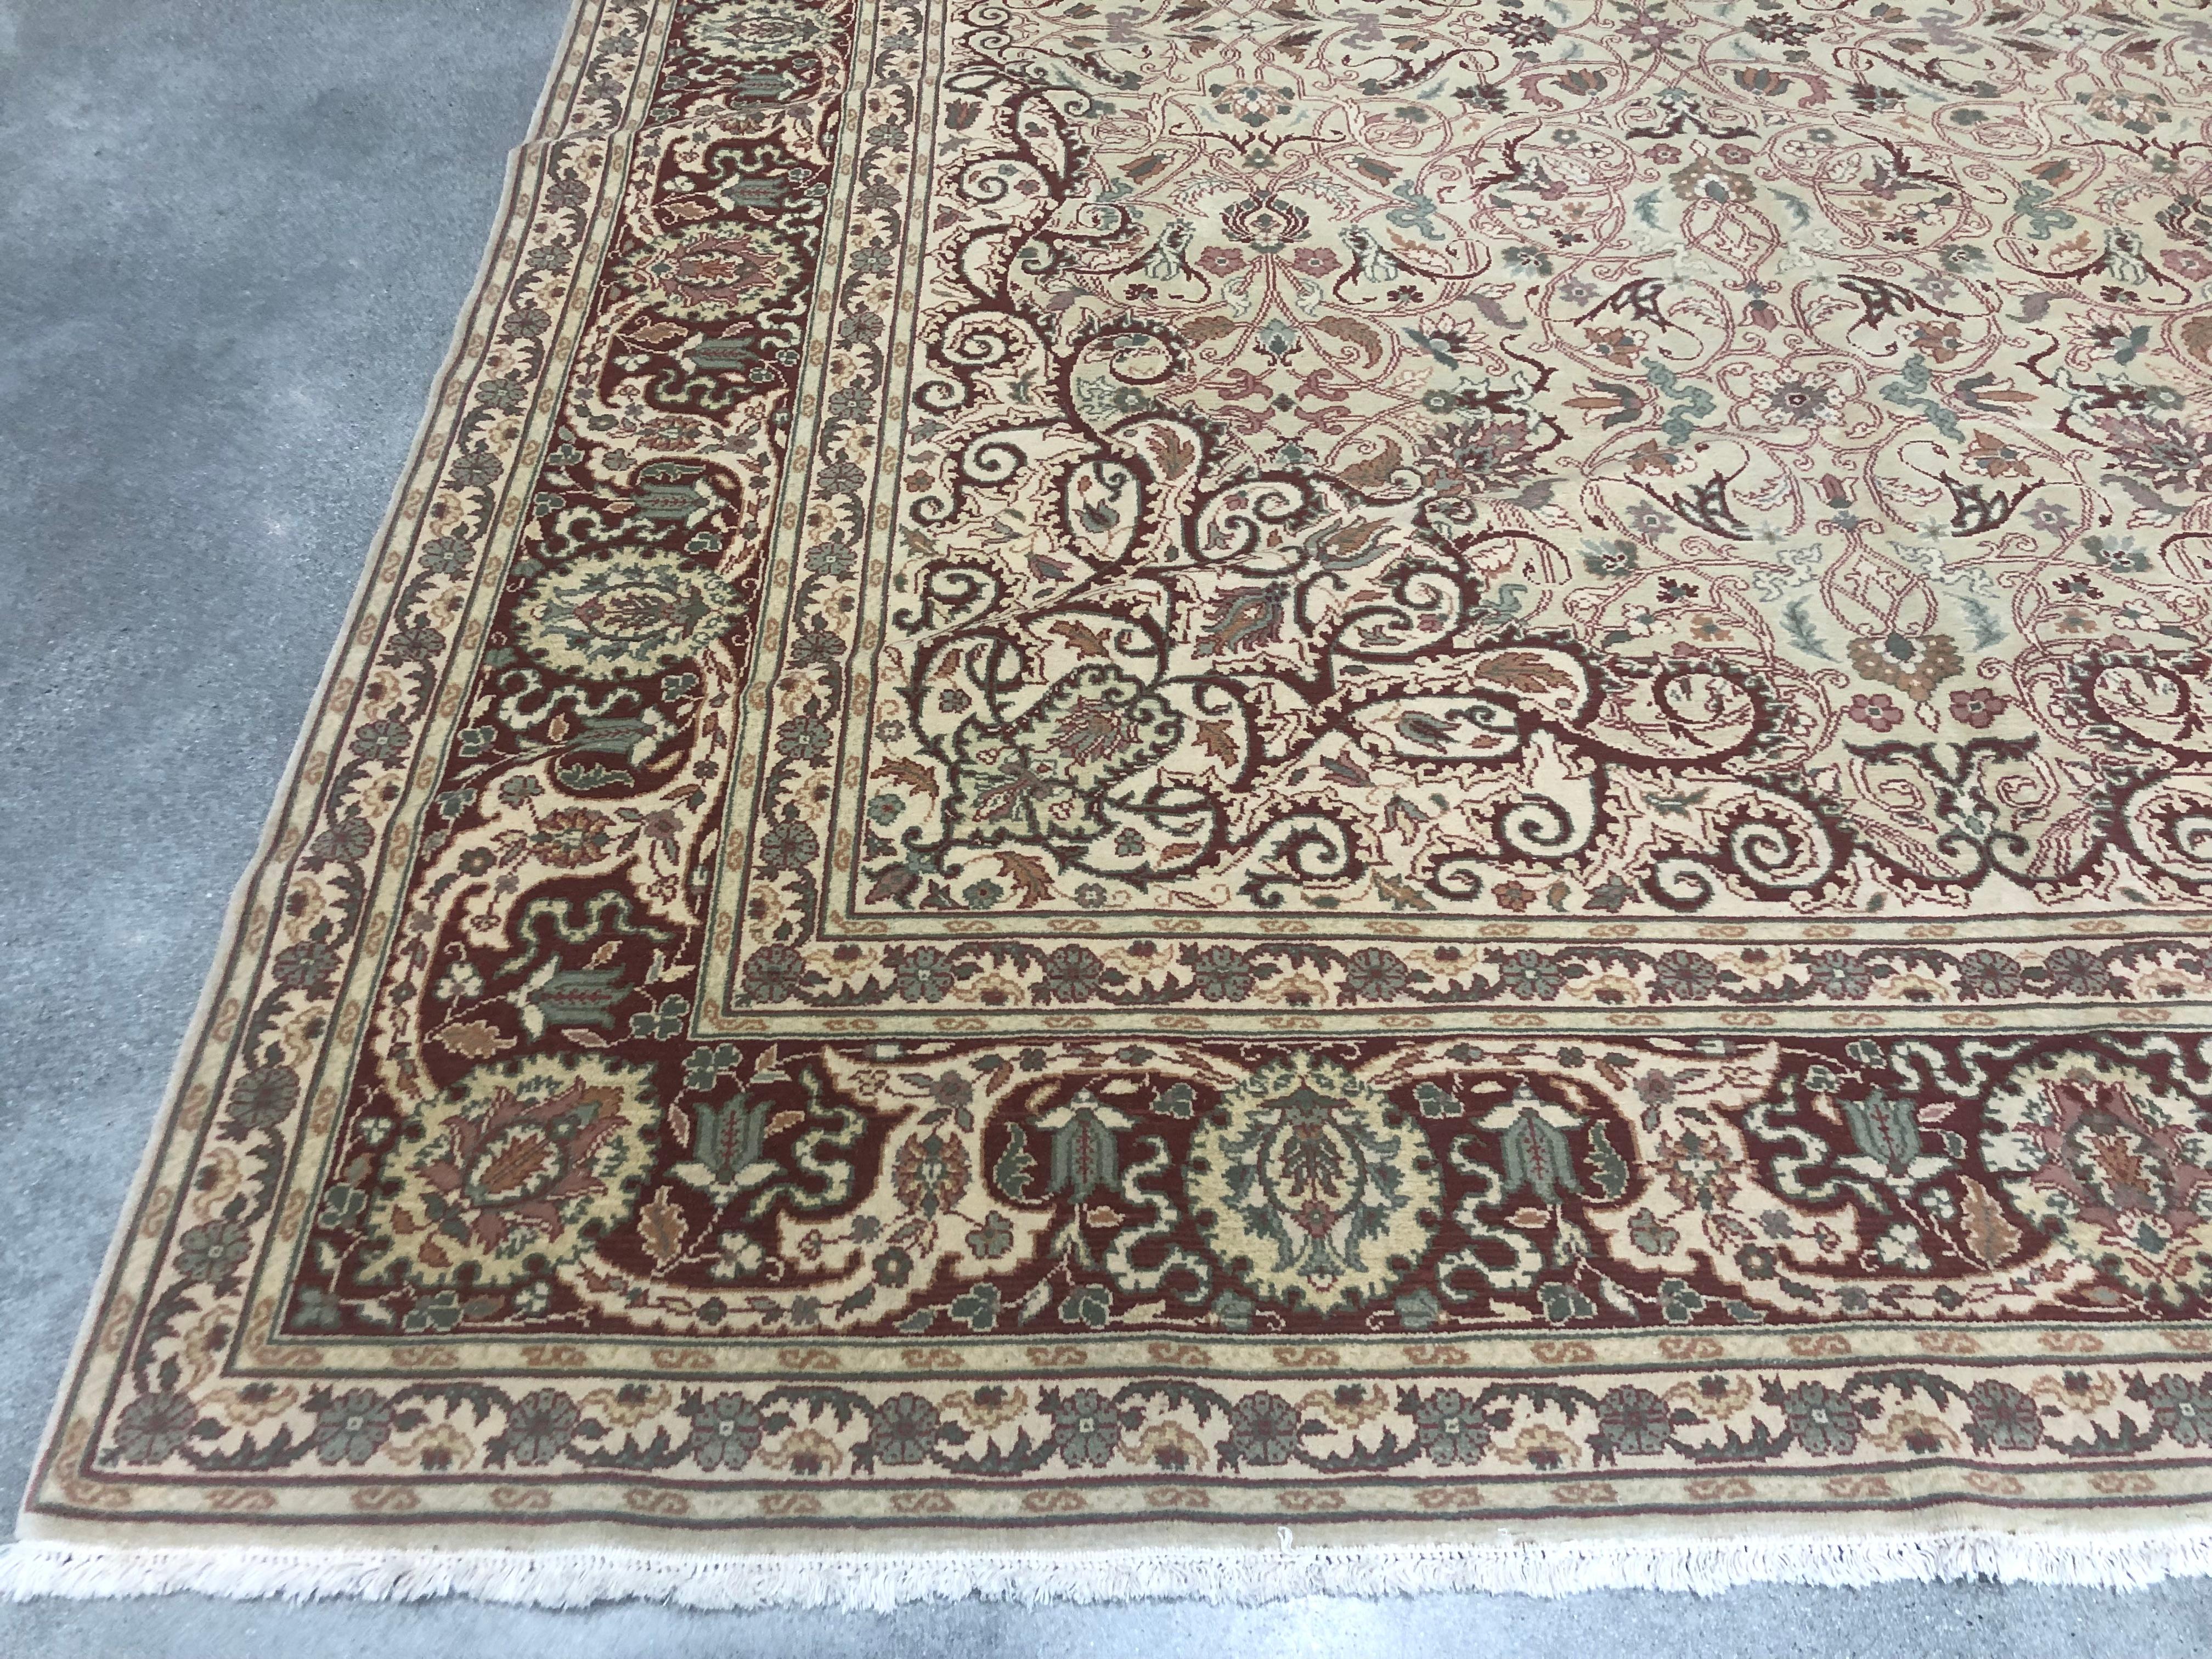 A fine example of a traditional Turkish Sivas style design with a bold red border and beige background. Flowing vines and flowers create a sense of movement and flow that combine grace and elegance. Hand knotted wool.